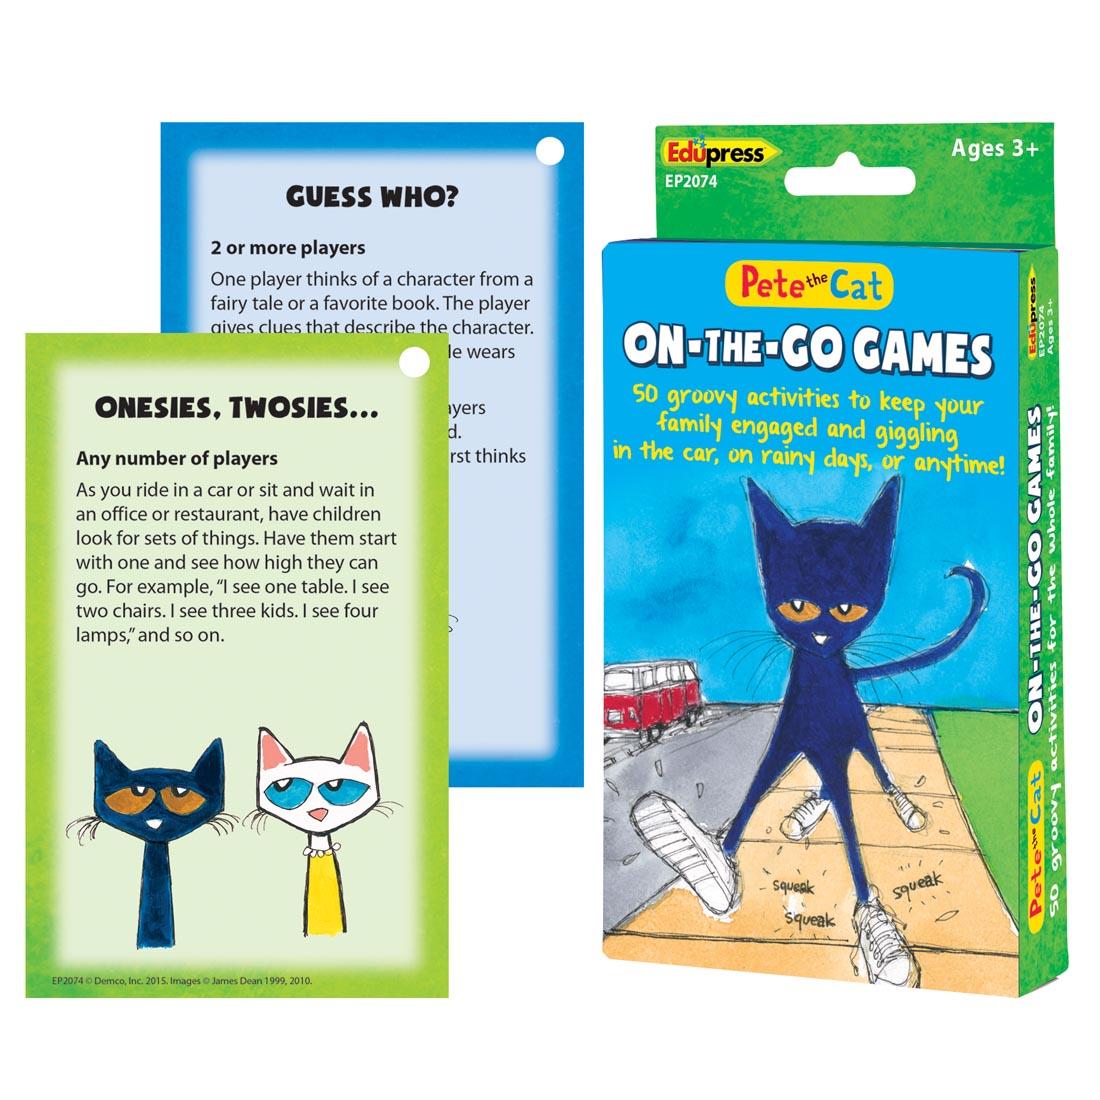 Package of Pete the Cat On-the-Go Games with sample cards of Onesies, Twosies and Guess Who?